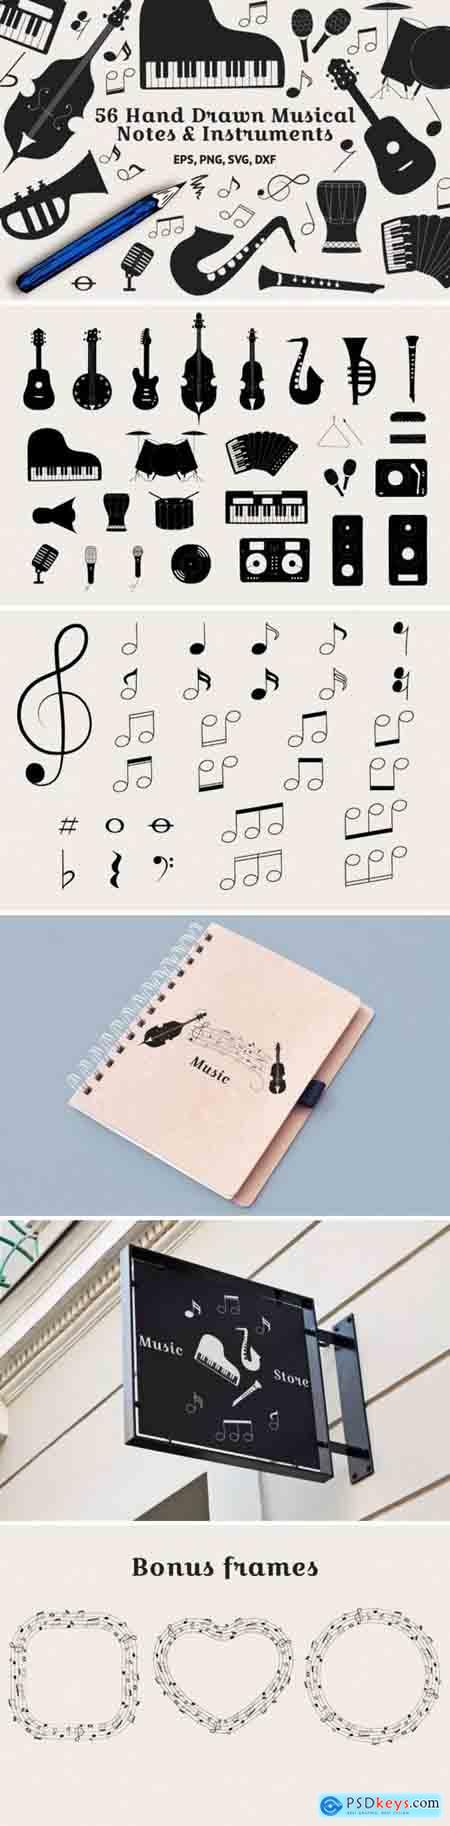 56 Hand Drawn Musical Instruments & Music Notes